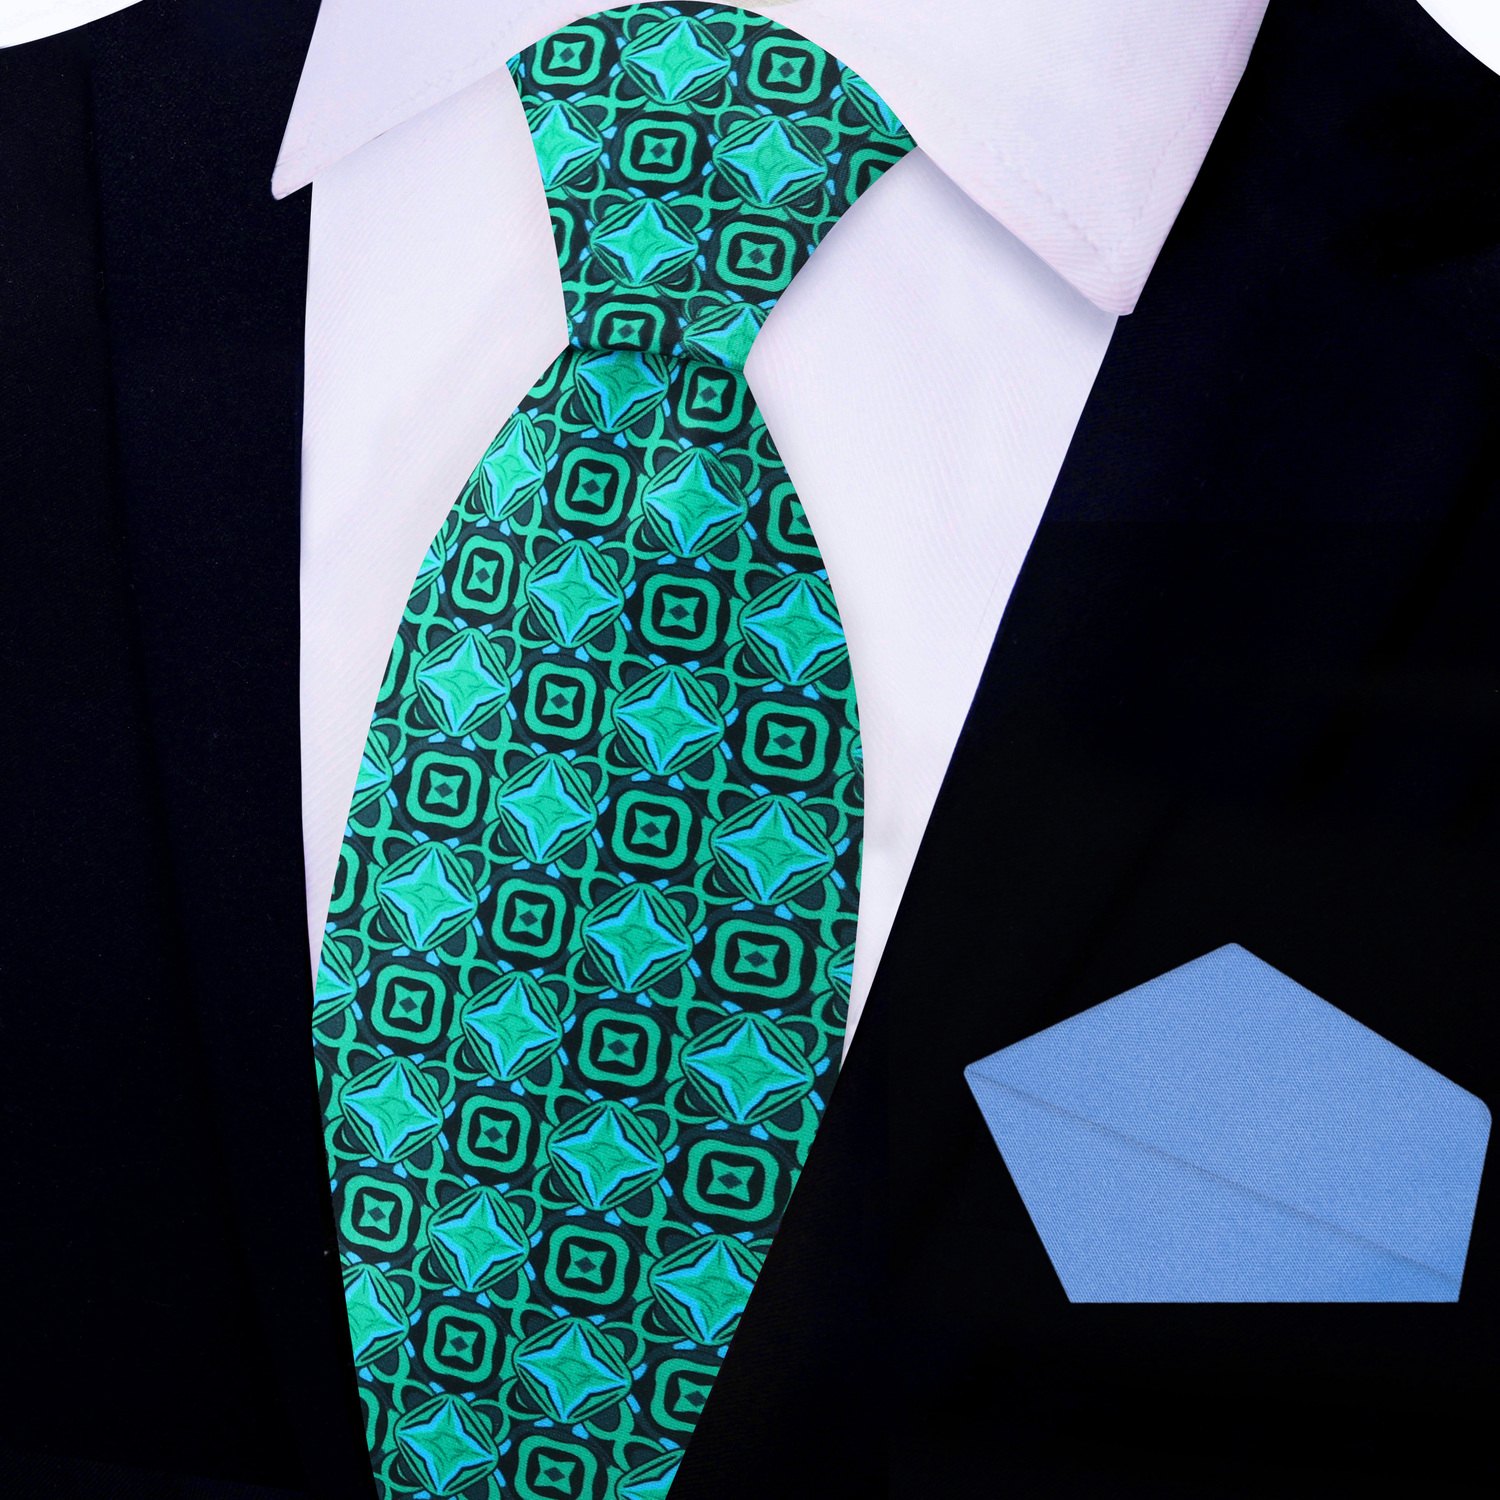 Green Geometric Tie and Light Blue Square